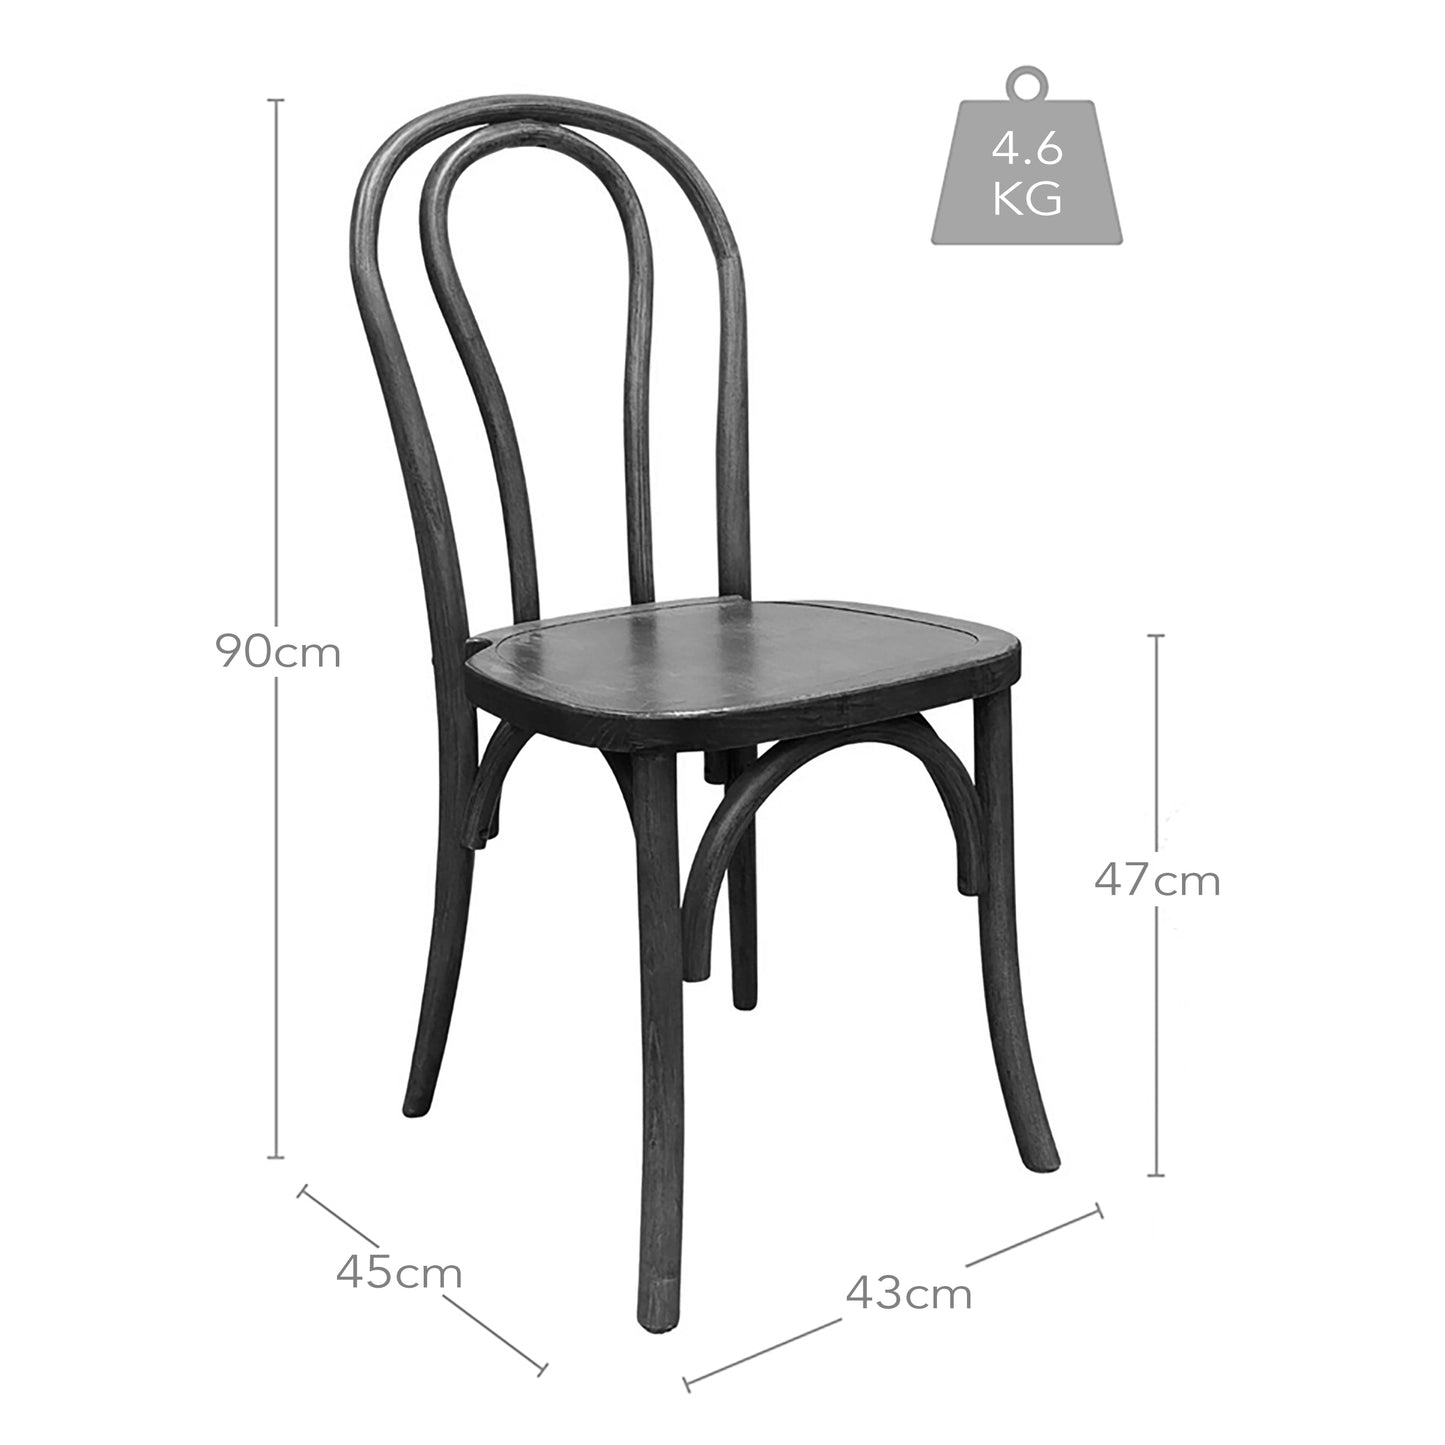 4. Loopback Stacking Chair